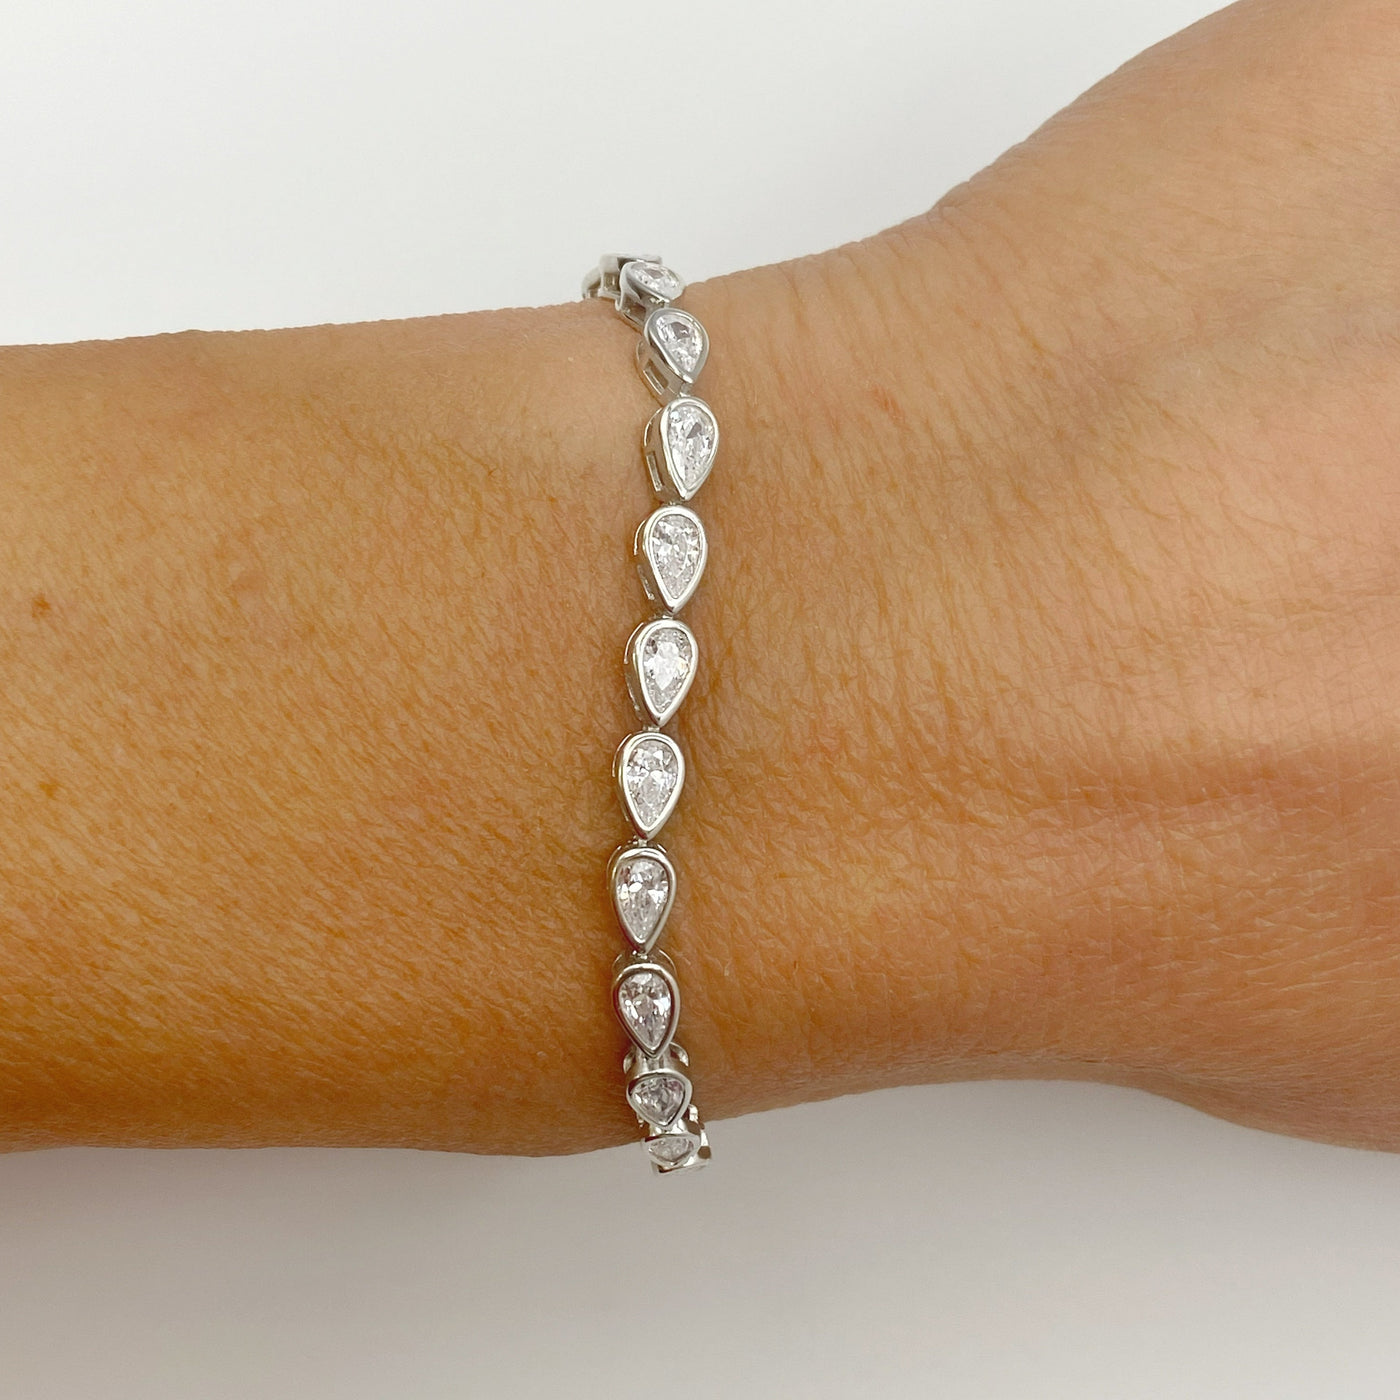 Silver tennis bracelet with white drop casting